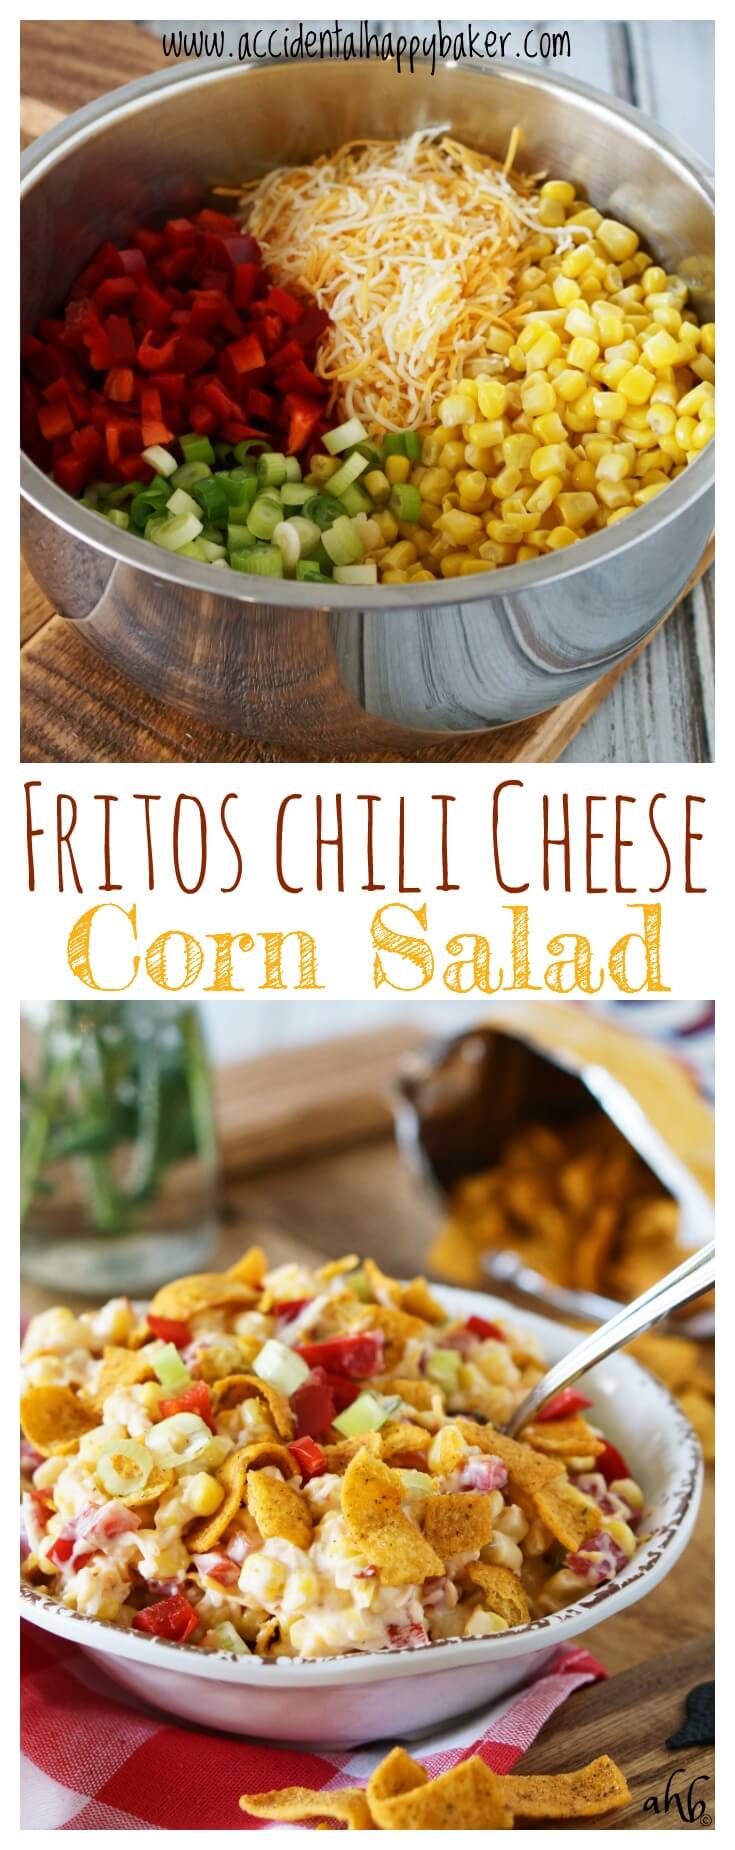 Crisp veggies, crunchy Fritos corn chips, cheddar cheese and a zippy creamy dressing. This Frito chili cheese corn salad couldn’t be easier, or more delicious!